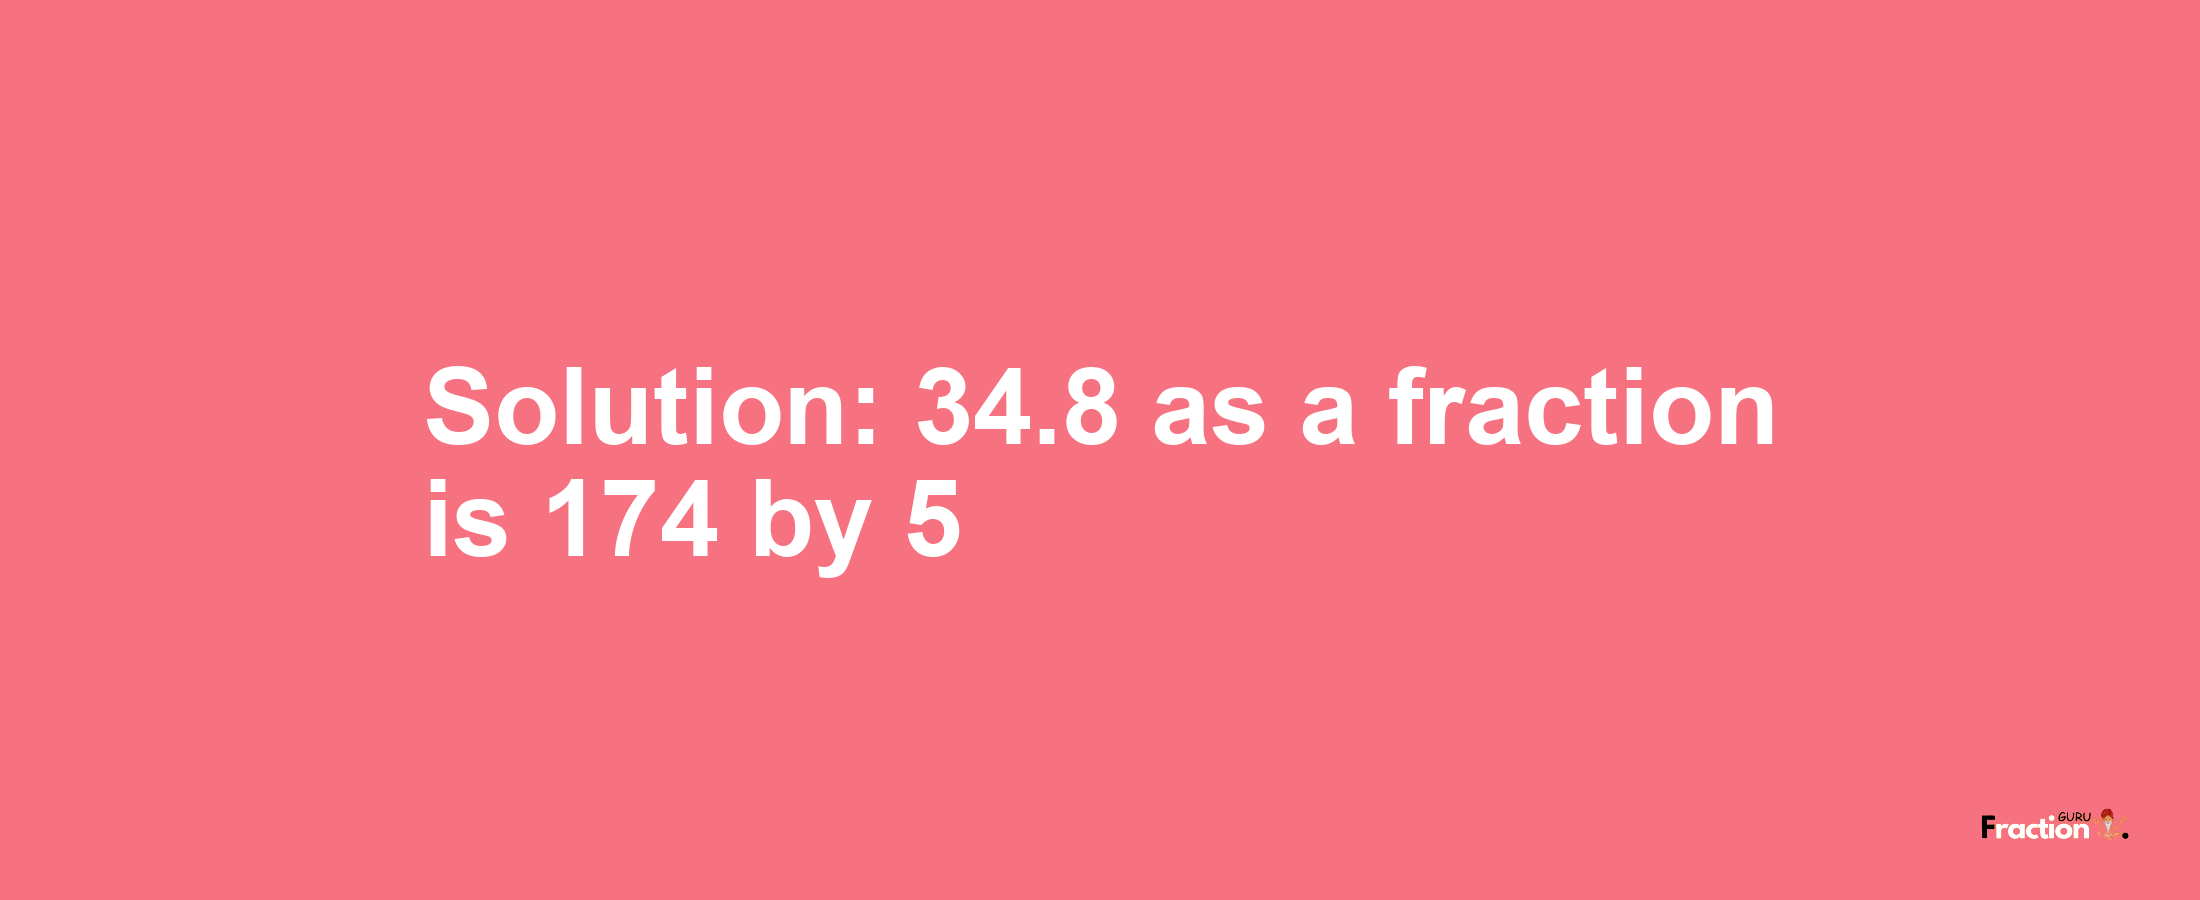 Solution:34.8 as a fraction is 174/5